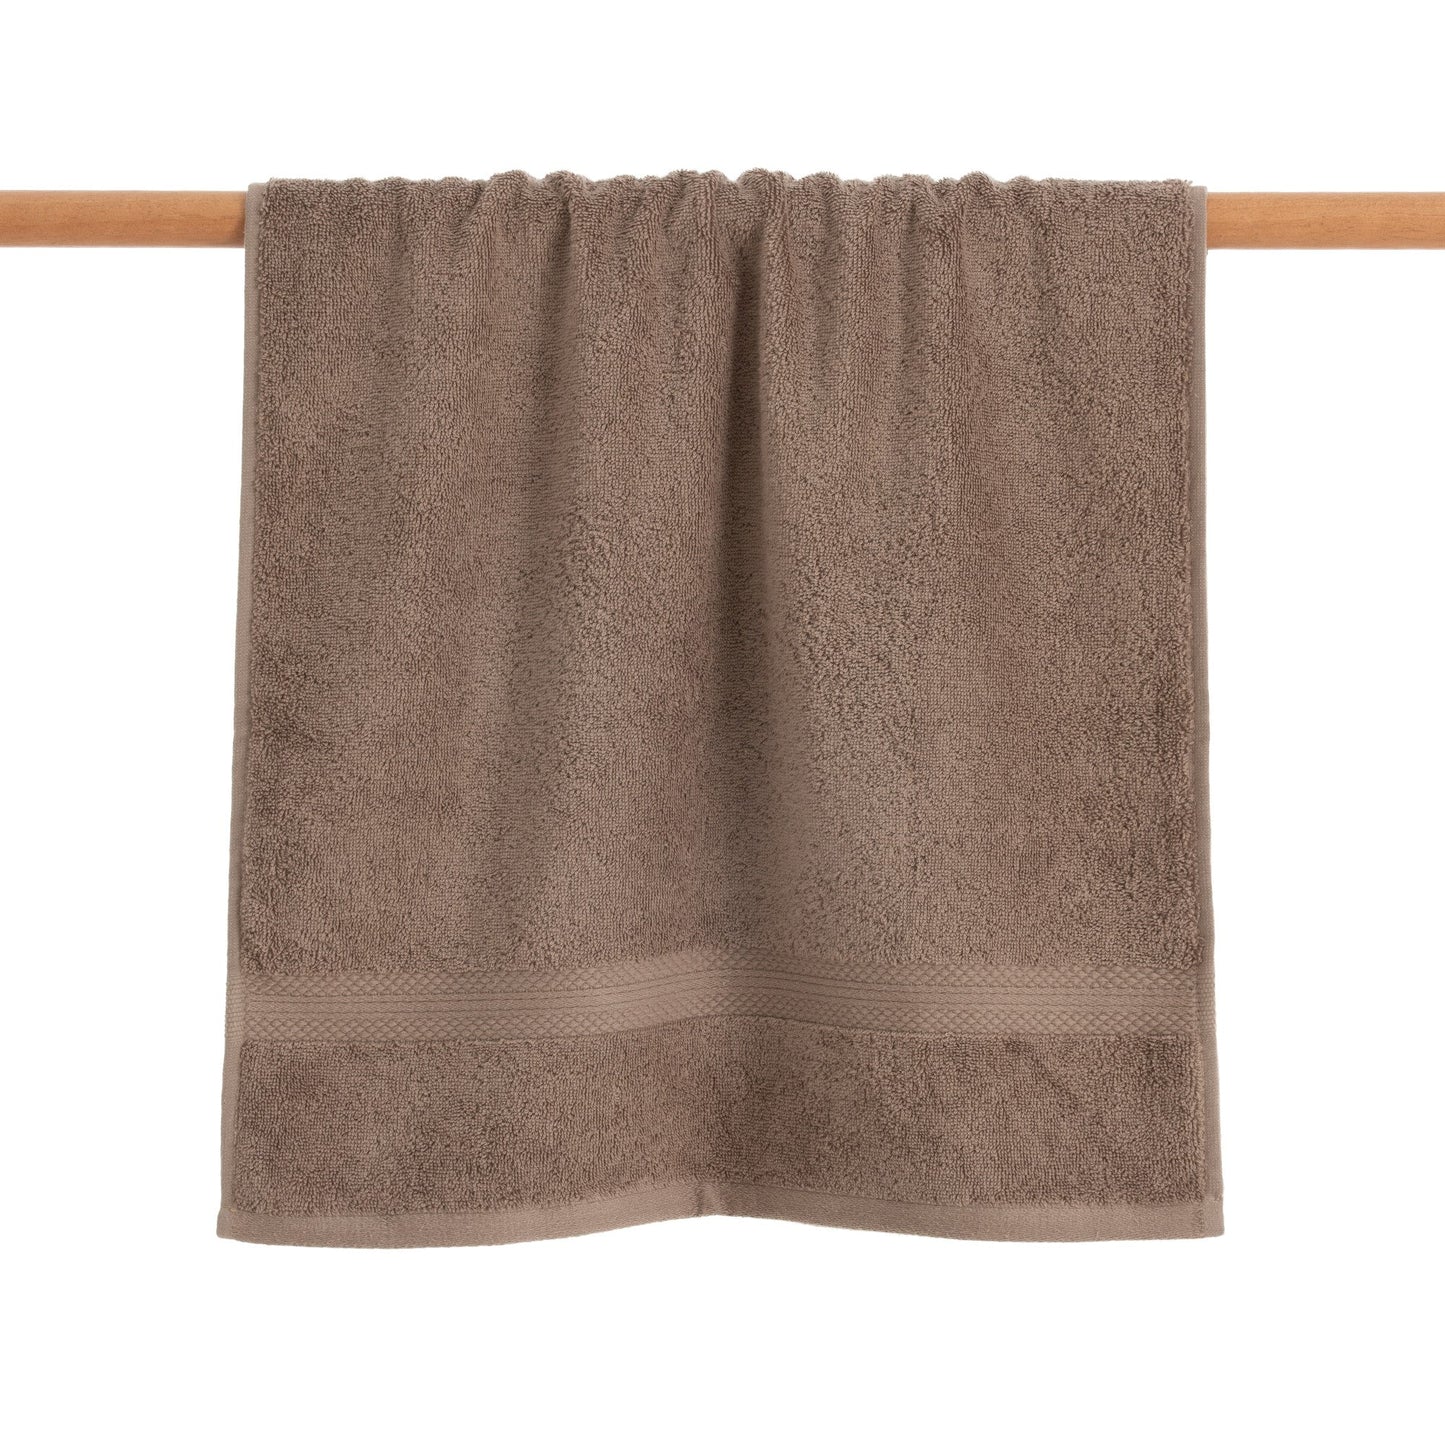 100% combed cotton towel 650 gr. taupe